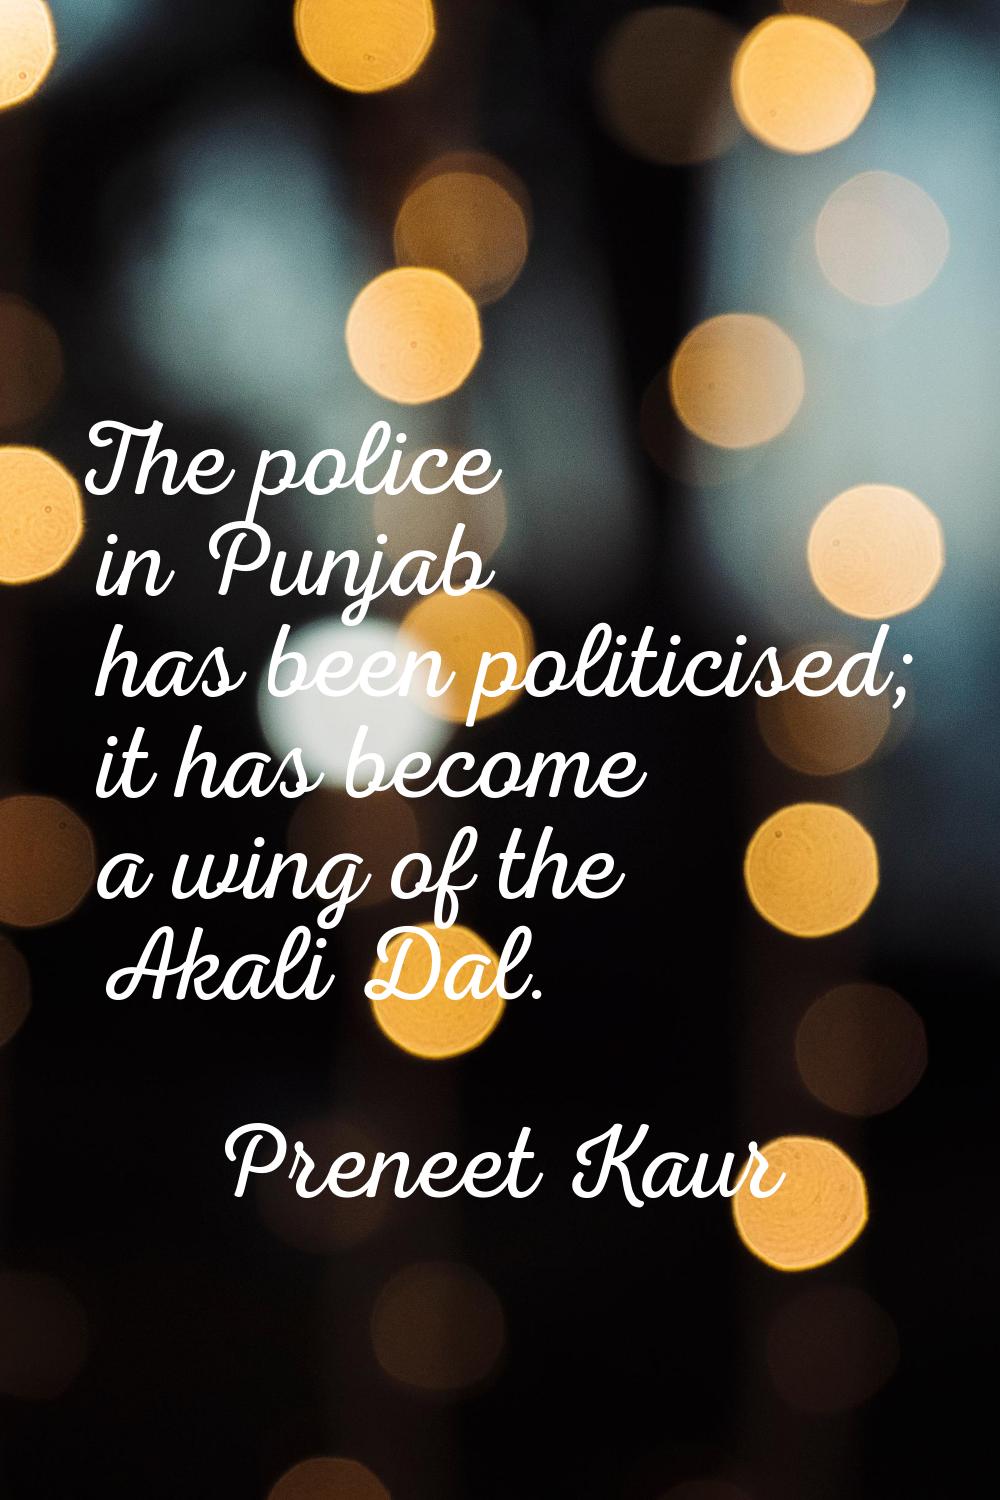 The police in Punjab has been politicised; it has become a wing of the Akali Dal.